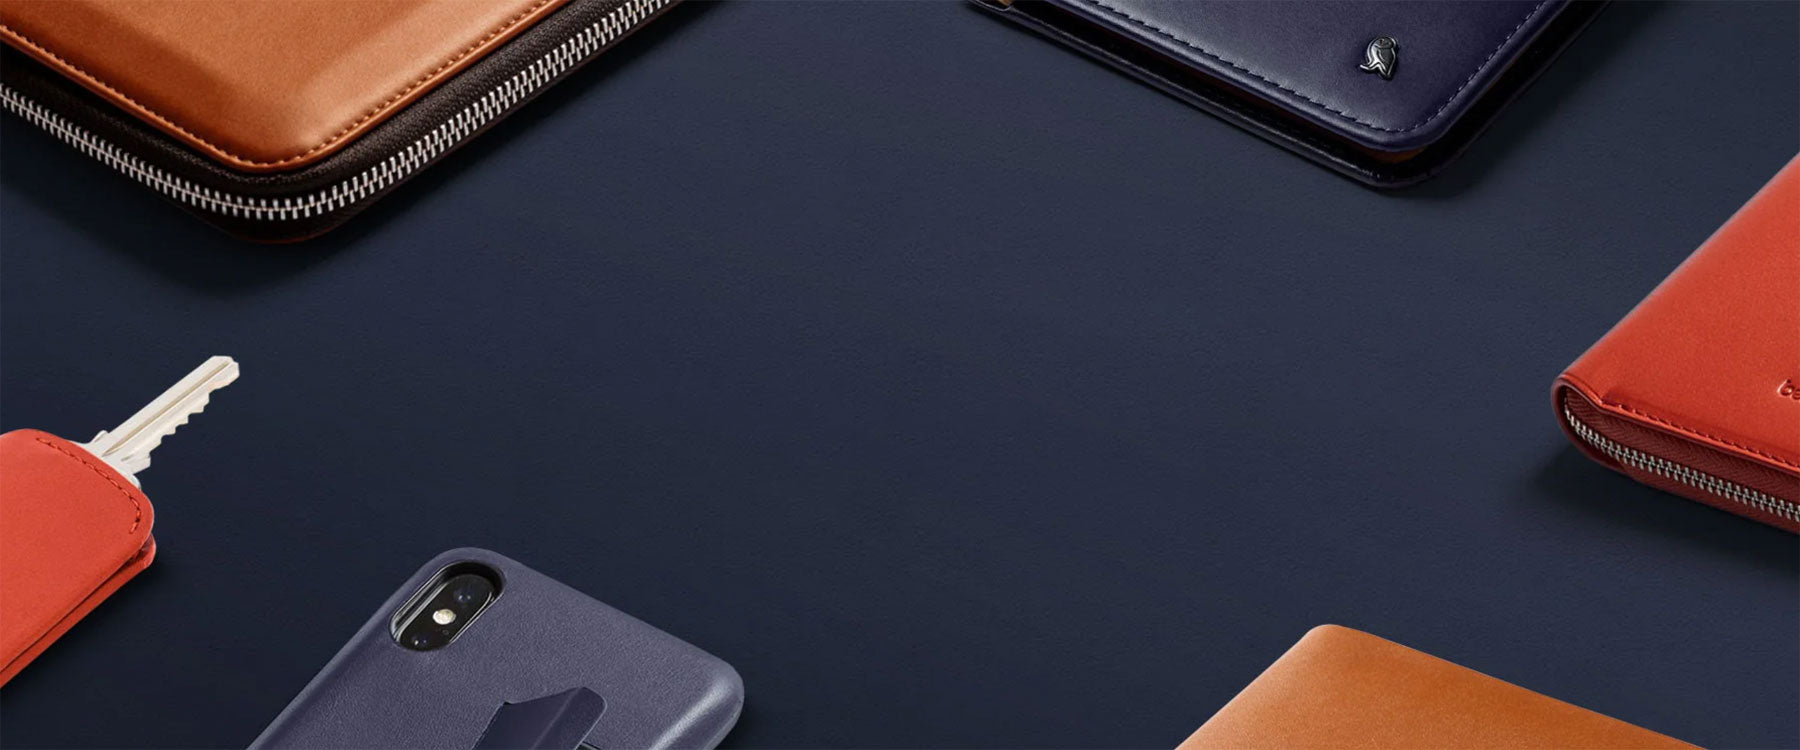 Bellroy - Designer Slim Leather Wallets and Cases for iPhone